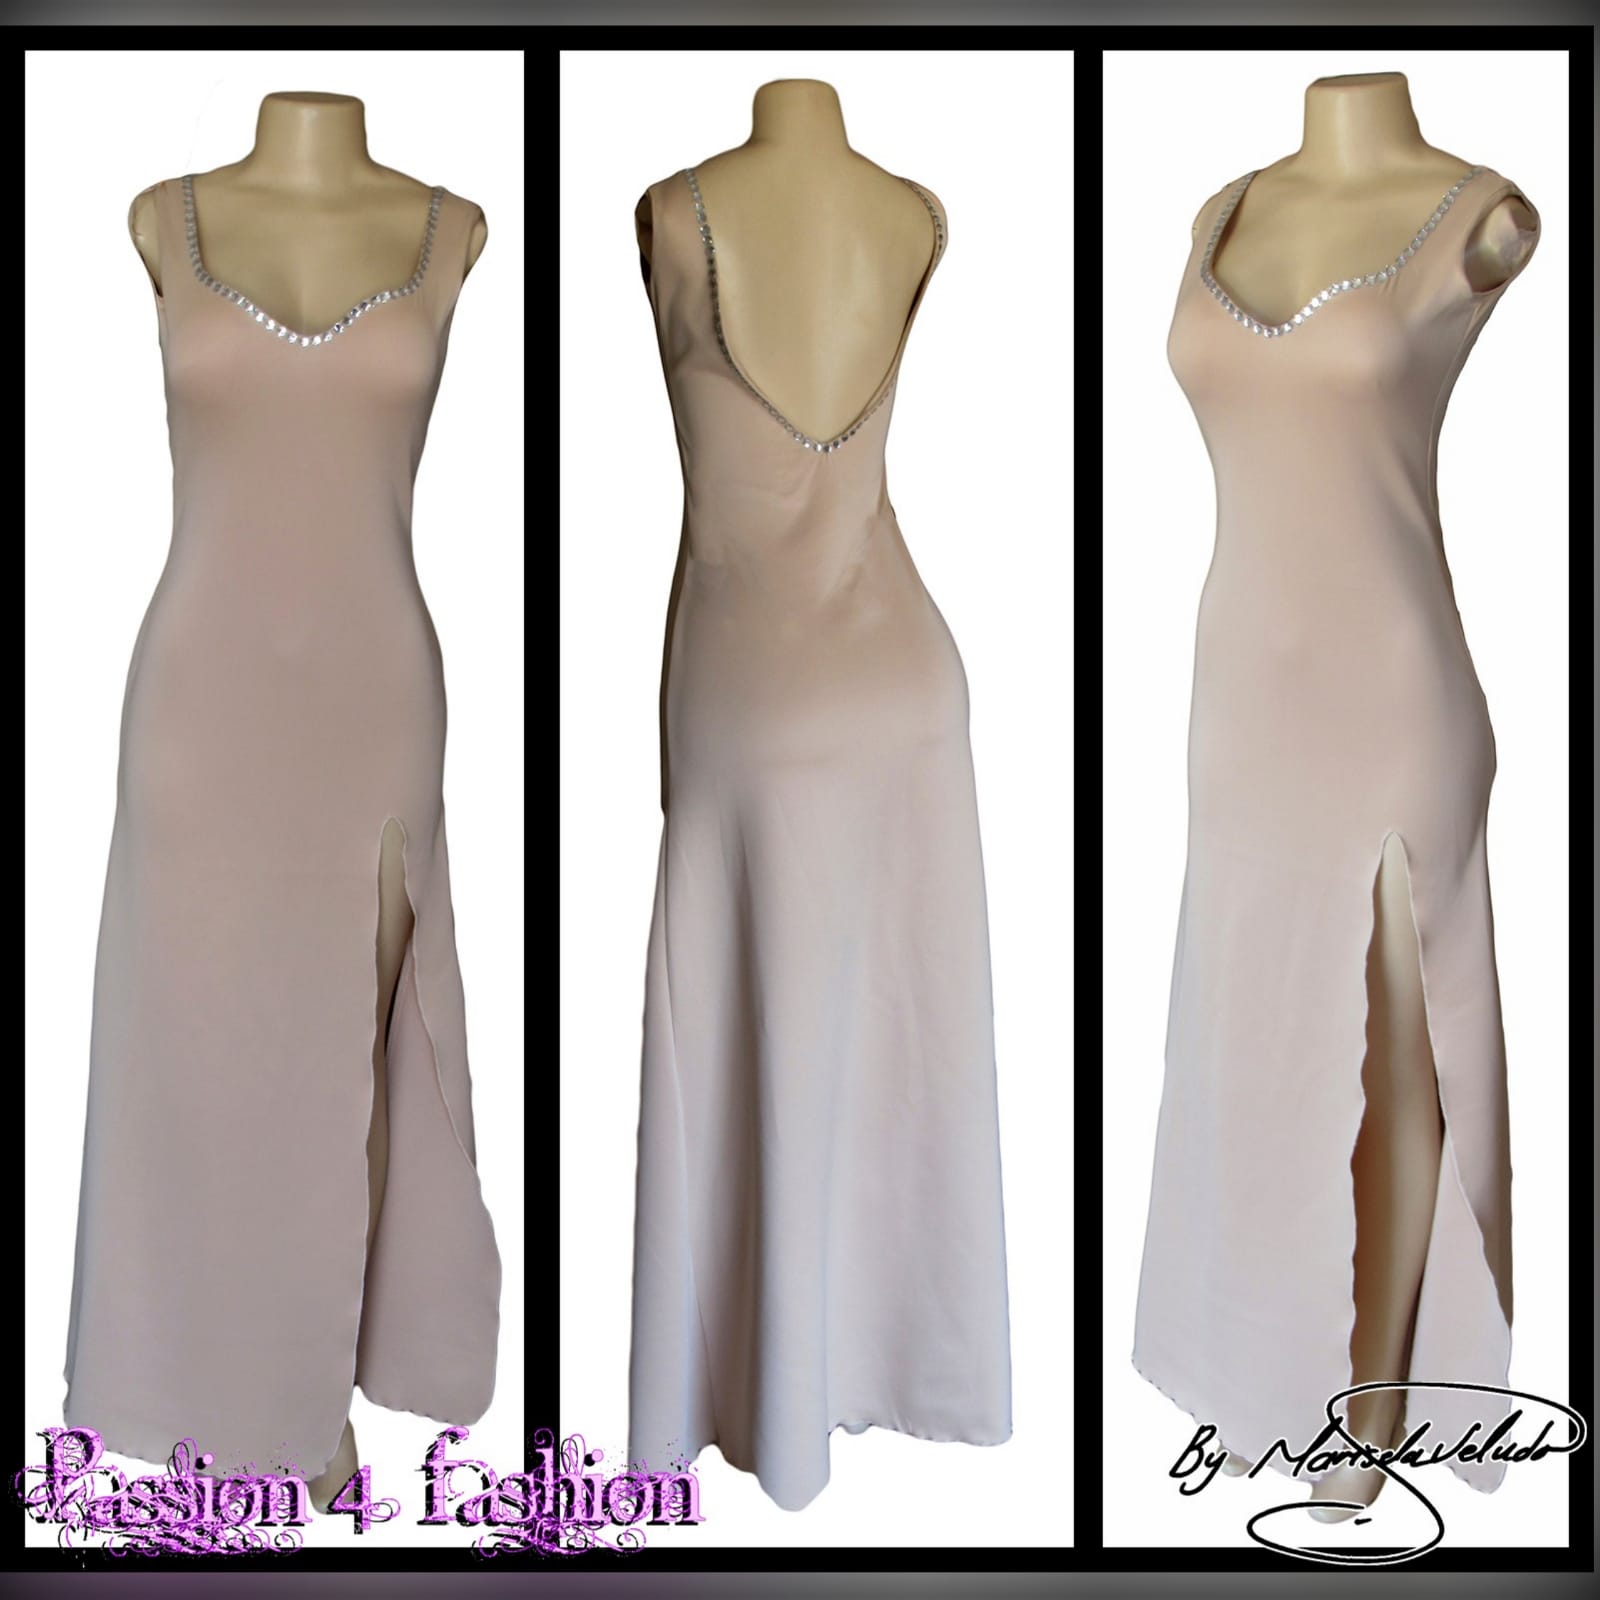 Nude simple elegant formal dress 3 nude simple elegant formal dress with a sweetheart neckline and a low rounded open back. Detailed with silver beads and a slit.